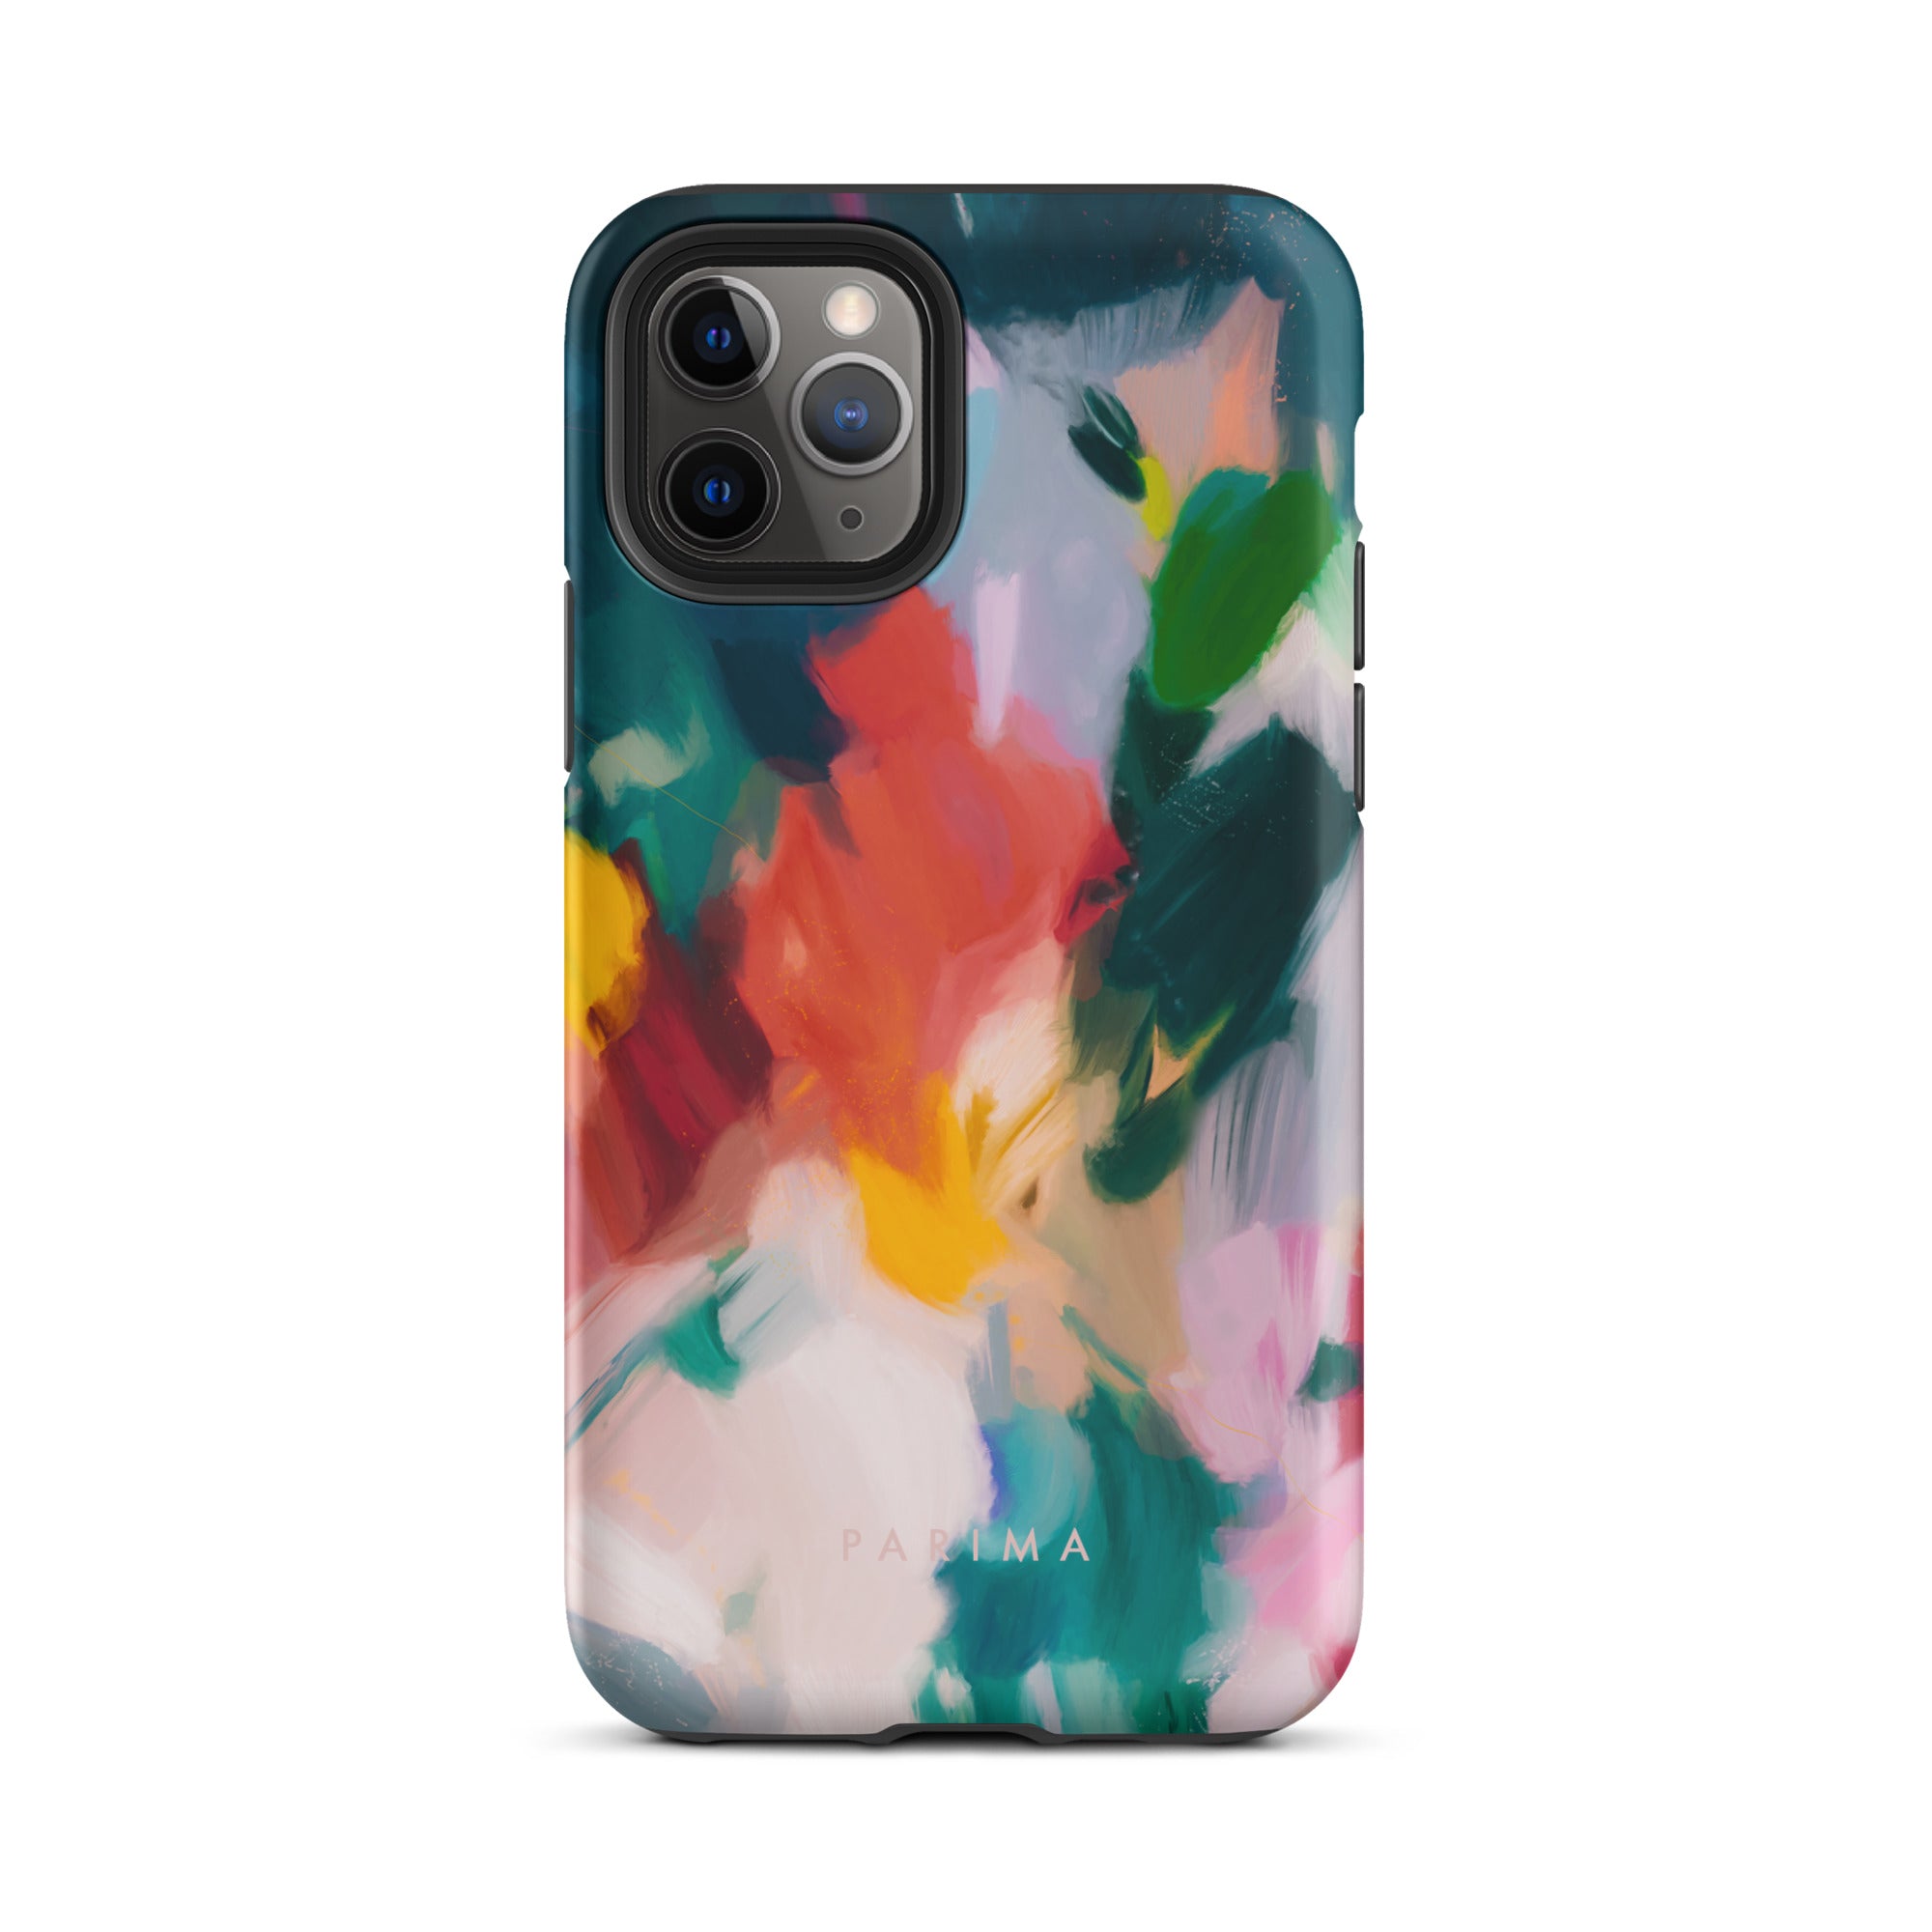 Pomme, blue and red abstract art on iPhone 11 Pro tough case by Parima Studio